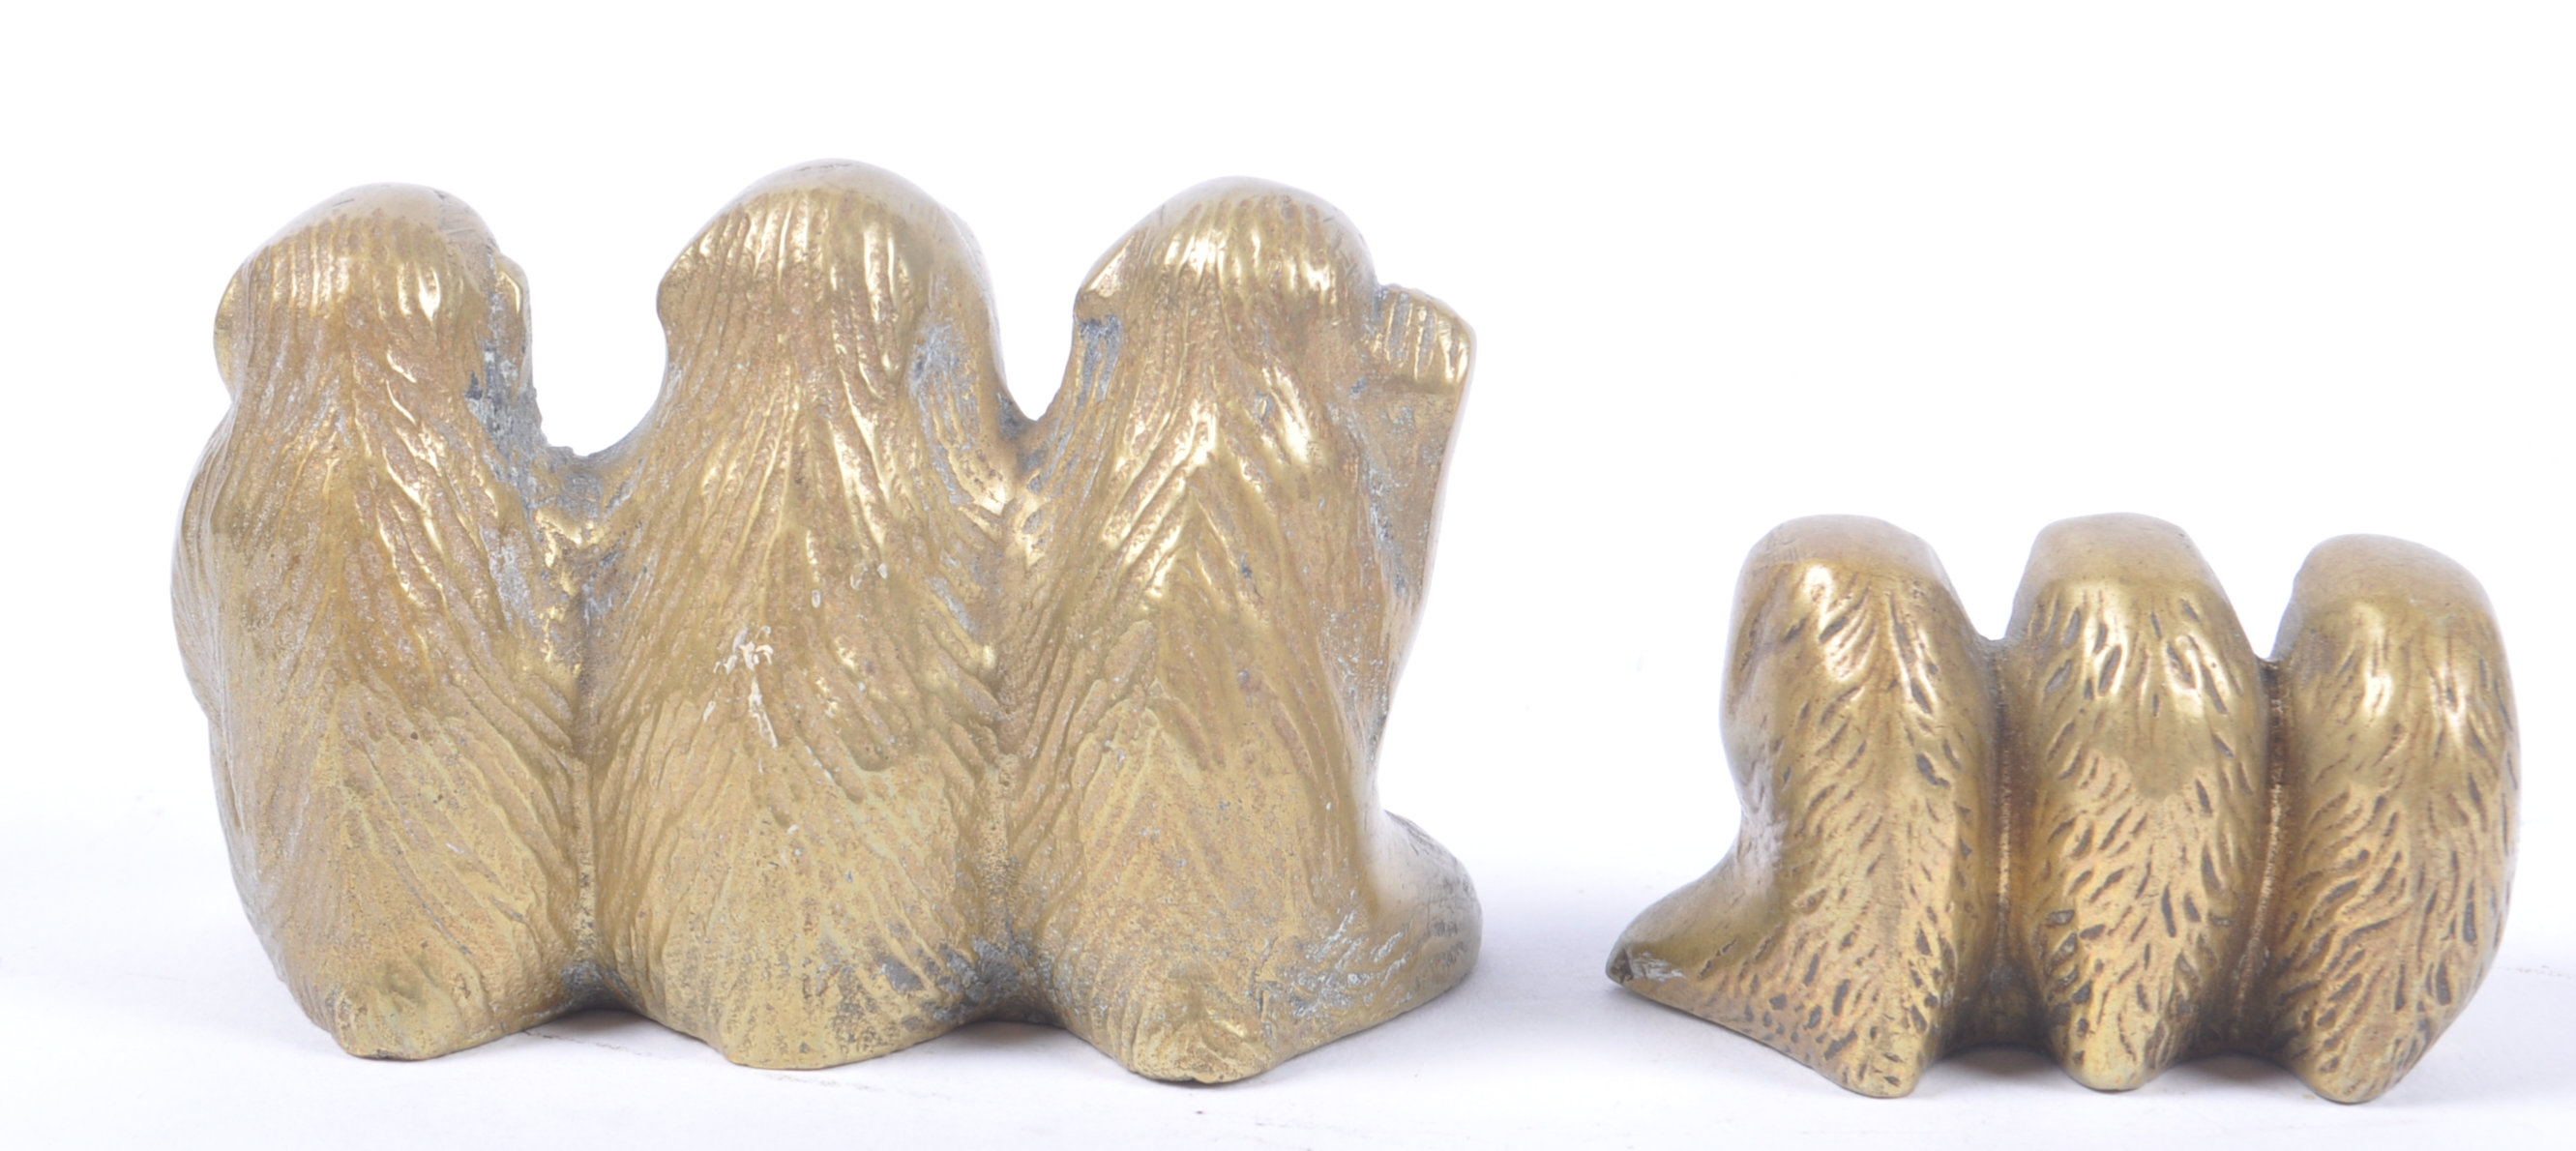 TWO 20TH CENTURY CHINESE MODELS OF THE THREE WISE MONKEYS - Image 3 of 4